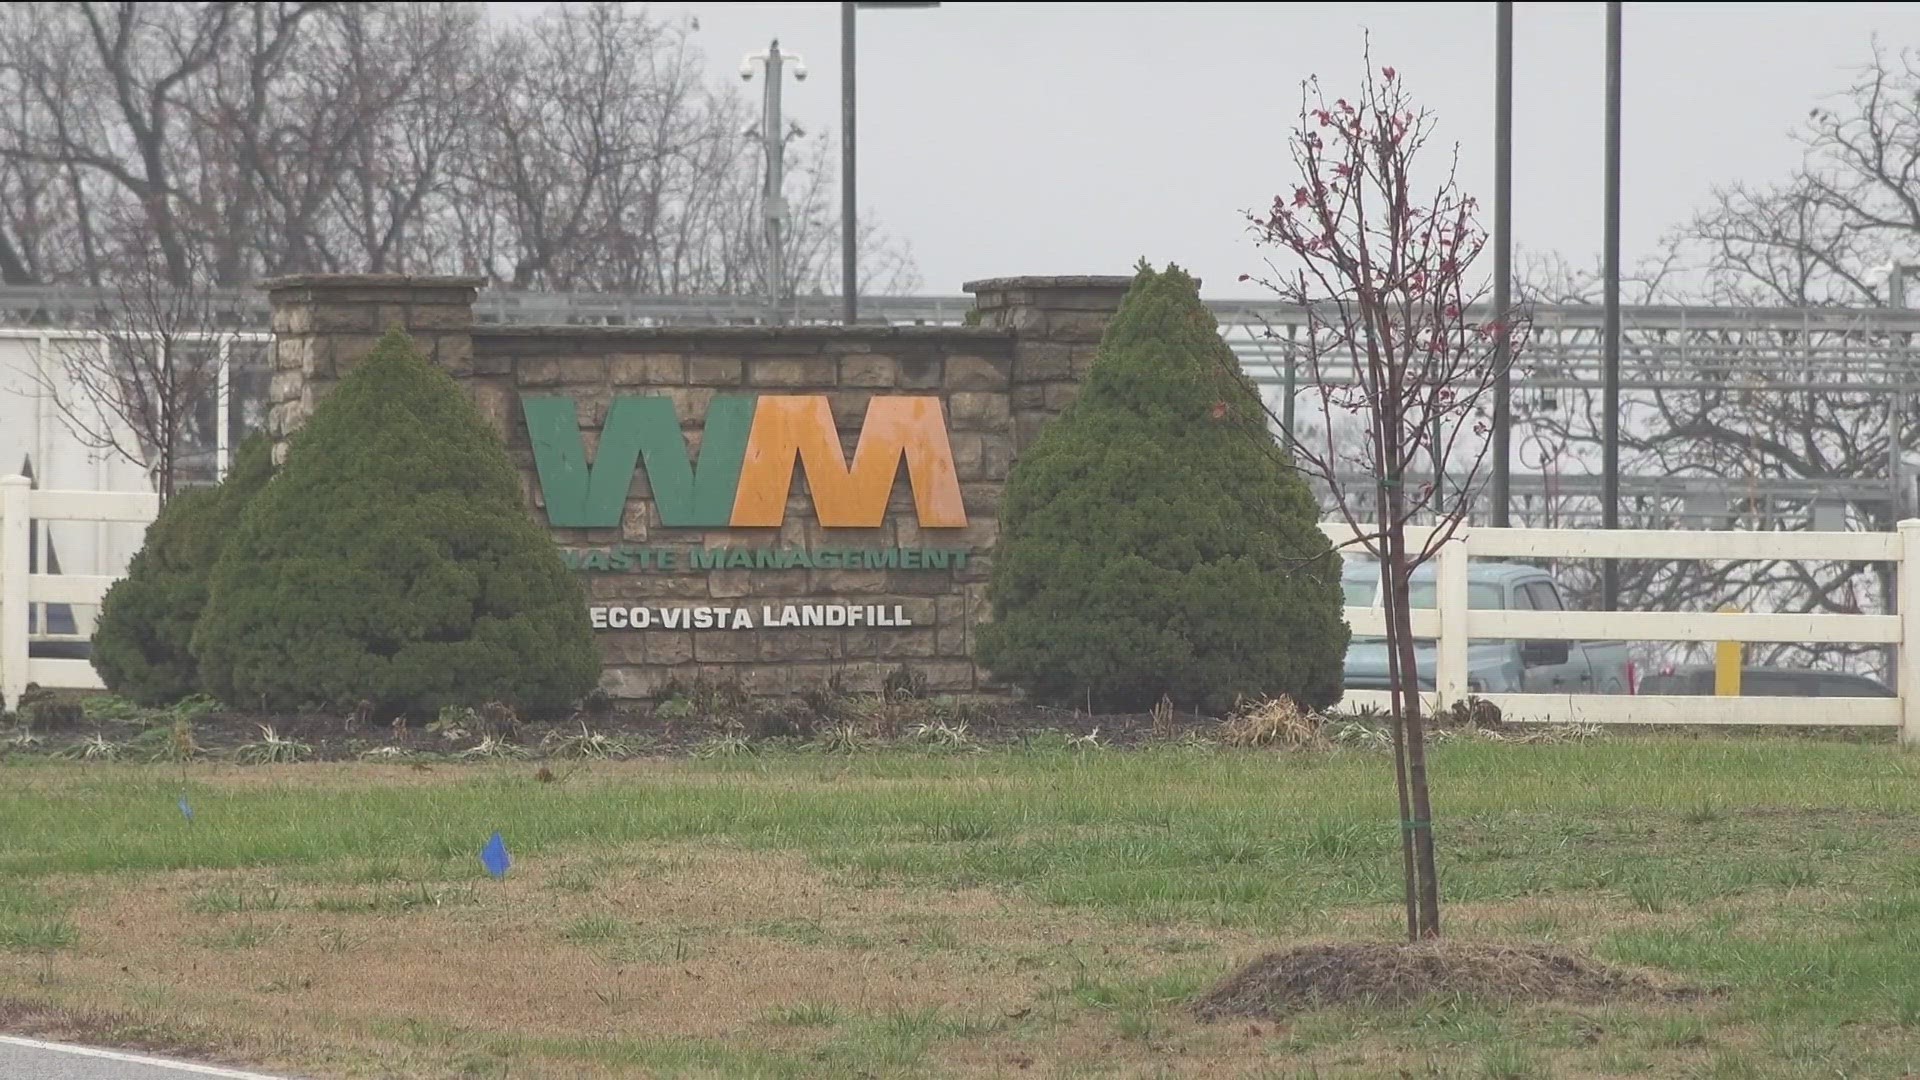 THE ARKANSAS DEPARTMENT OF ENVIRONMENTAL QUALITY HAS LAUNCHED AN INVESTIGATION INTO COMPLAINTS ABOUT AIR QUALITY NEAR THE ECO VISTA LANDFILL.